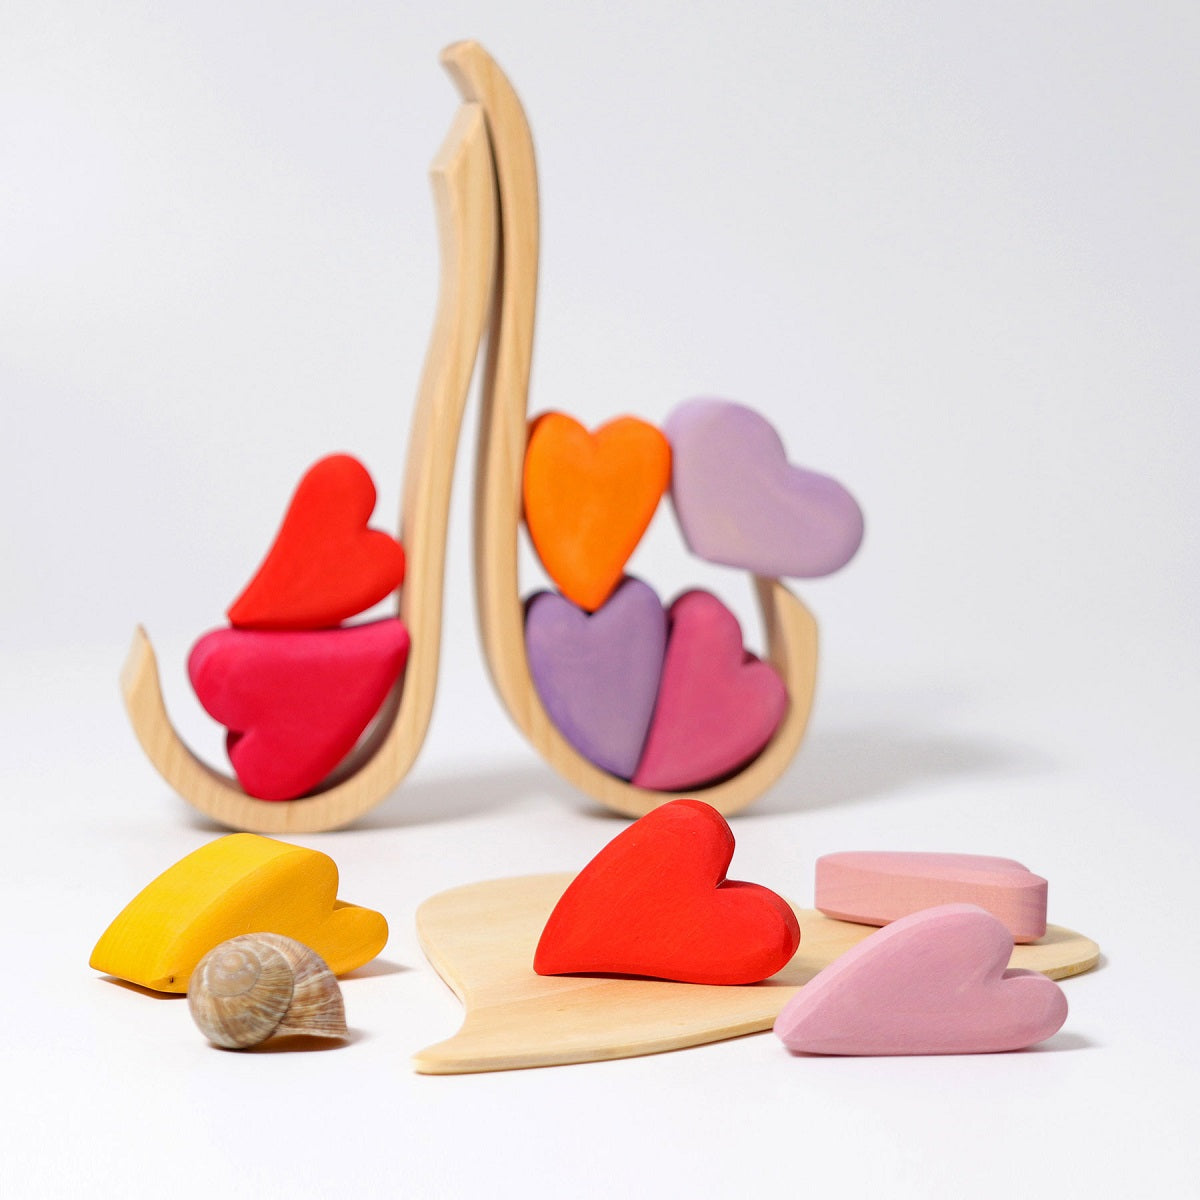 Wooden Toy - Grimm's RED HEARTS BLOCKS Building set, 10 hearts!